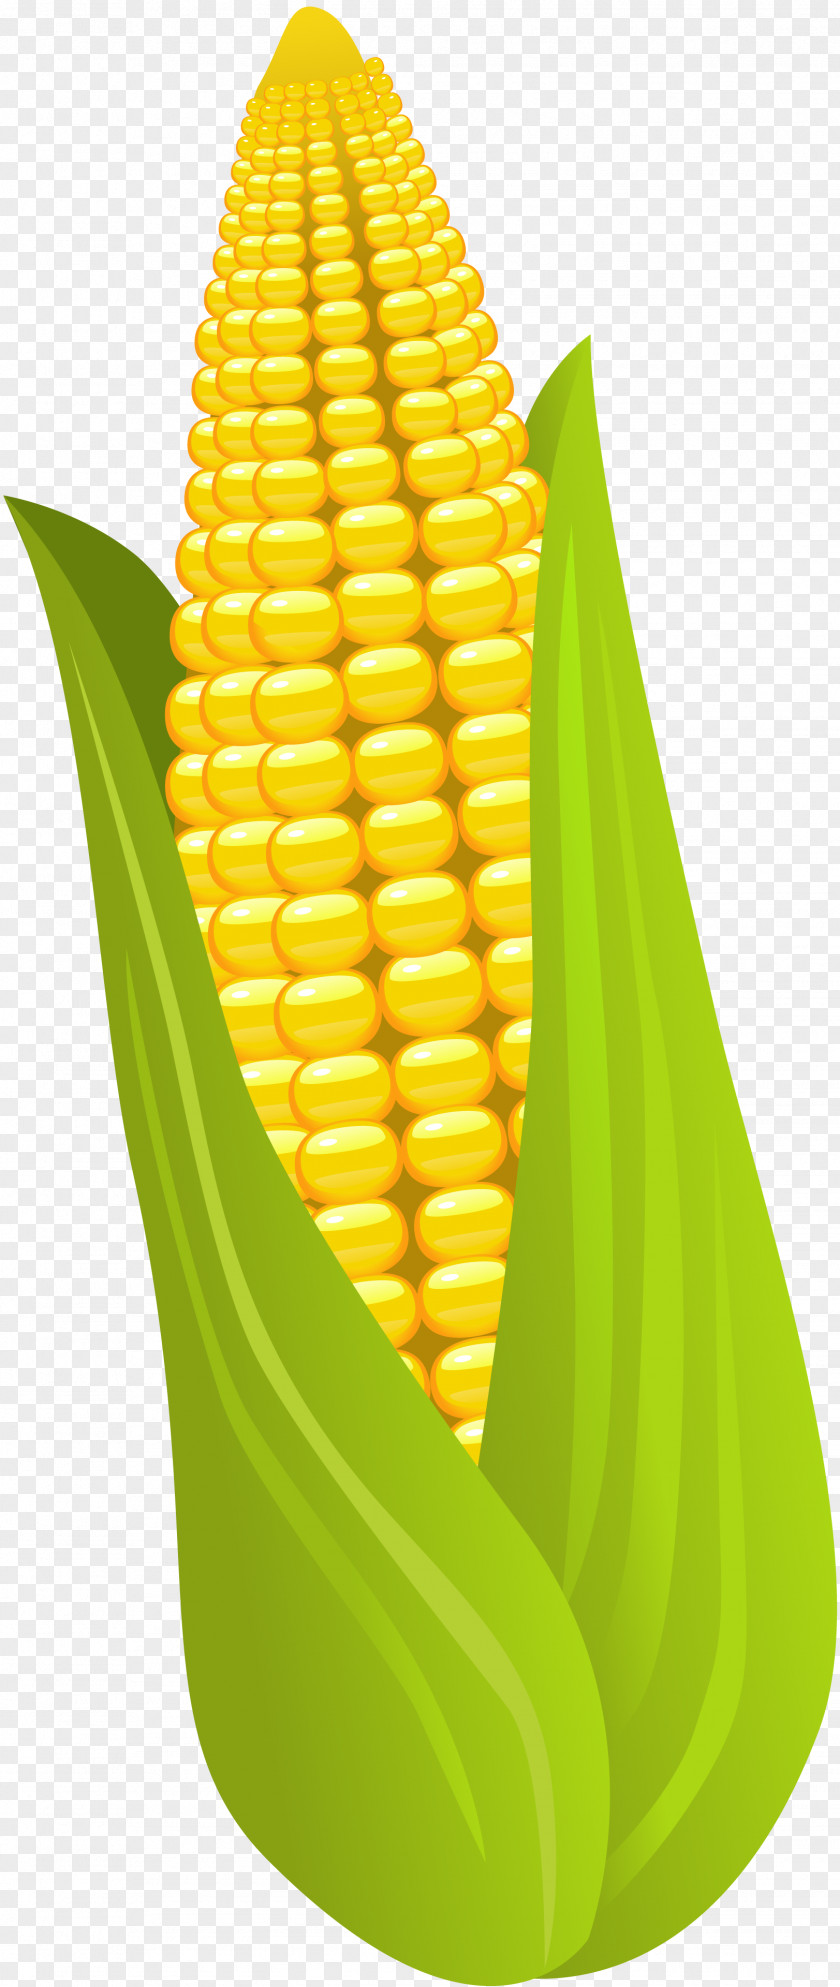 Vector Seafood Corn On The Cob Maize Food Vegetarian Cuisine Vegetable PNG